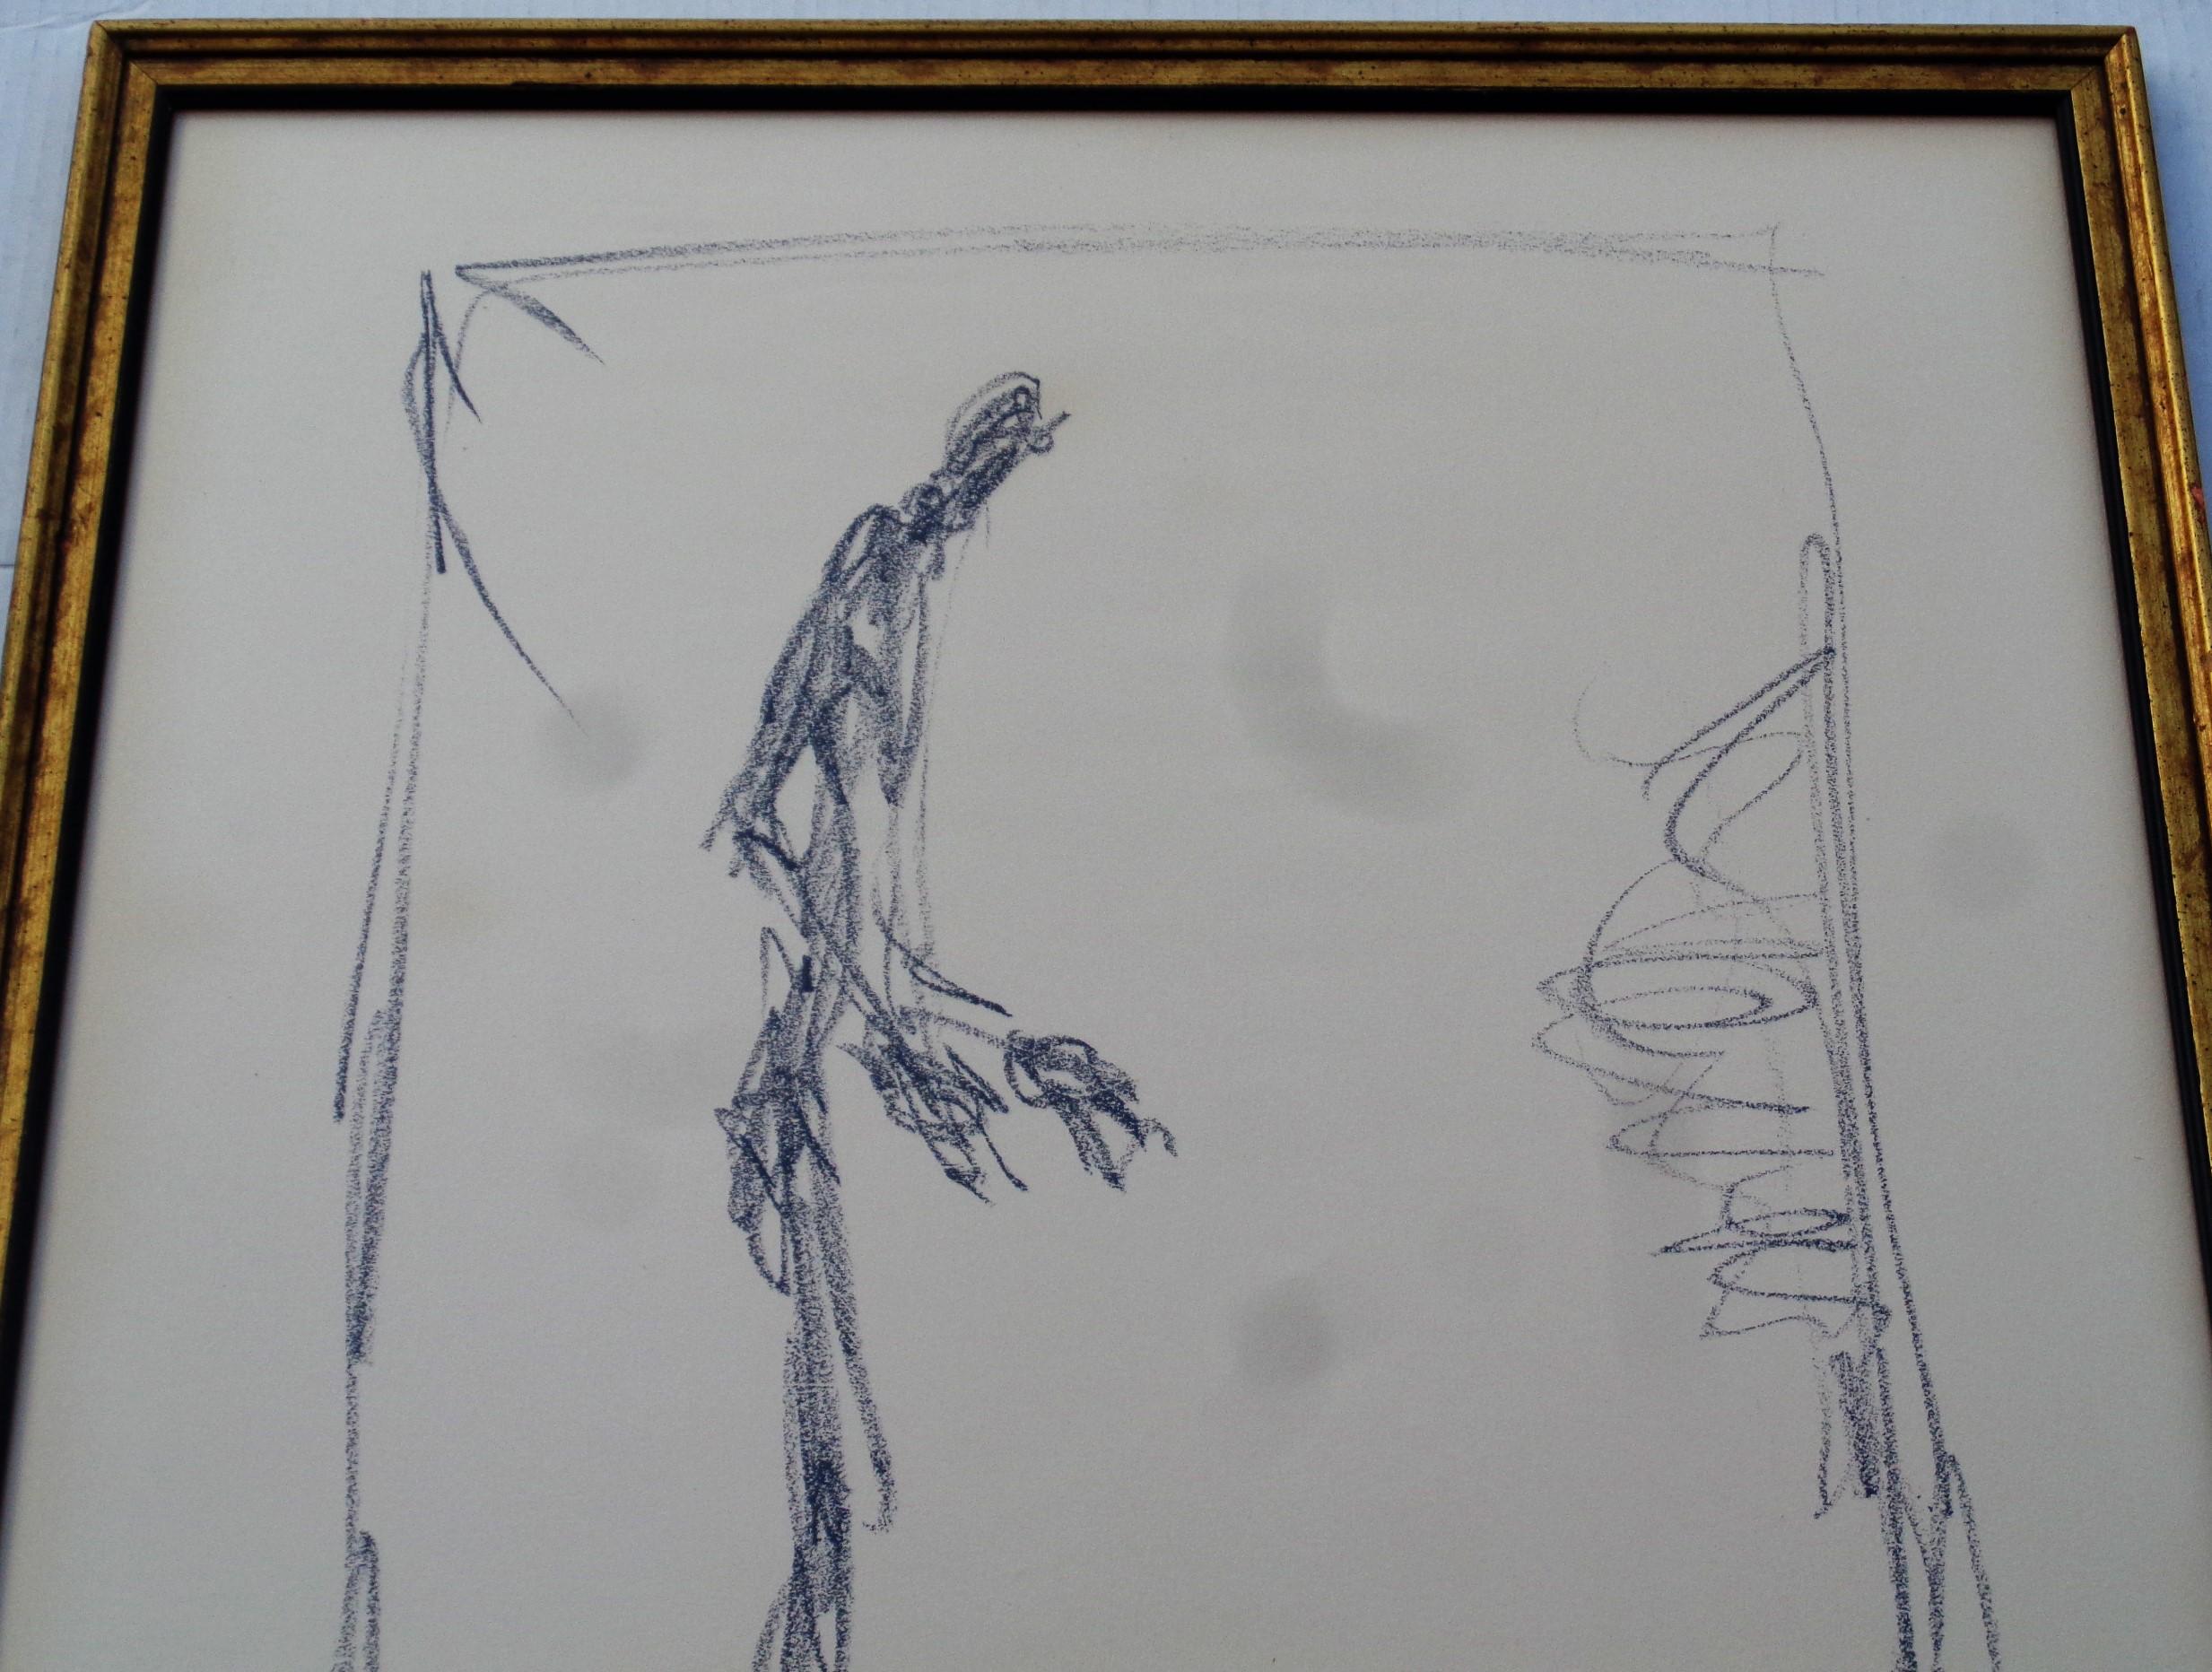 After Alberto Giacometti - Dessin 1 - large format lithograph on rag paper in period giltwood frame under glass ( original old framers label on back - Empire Artist's Materials / 831 Lexington Avenue N.Y. 10021  / Phone RE 7-5002 - see img 5 ) the